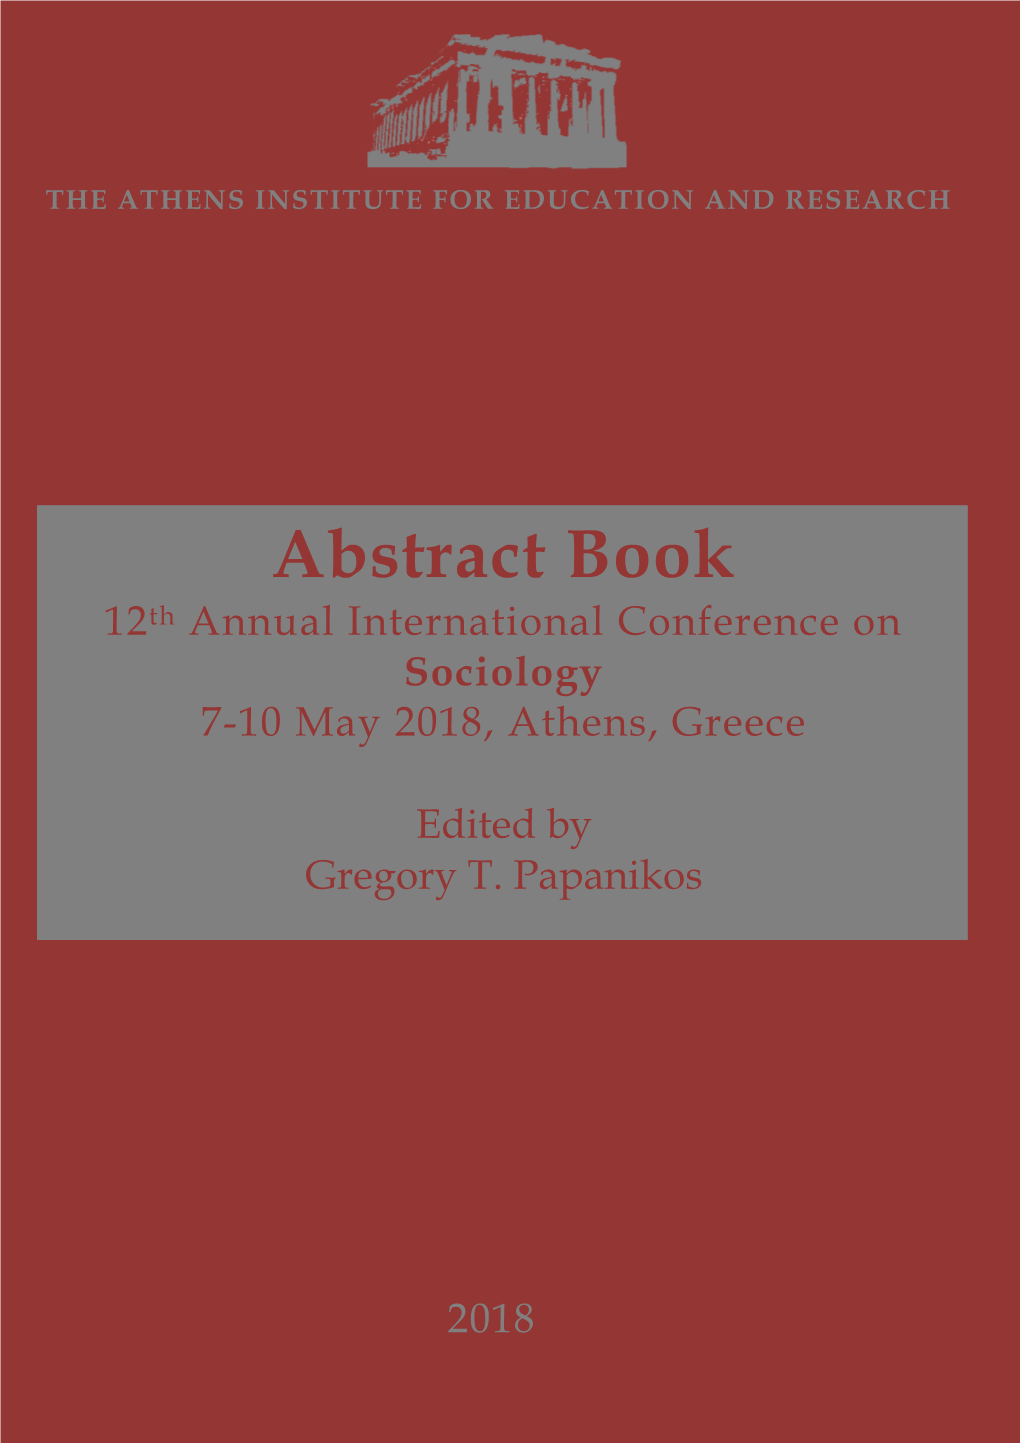 Abstract Book 12Th Annual International Conference on Sociology 7-10 May 2018, Athens, Greece